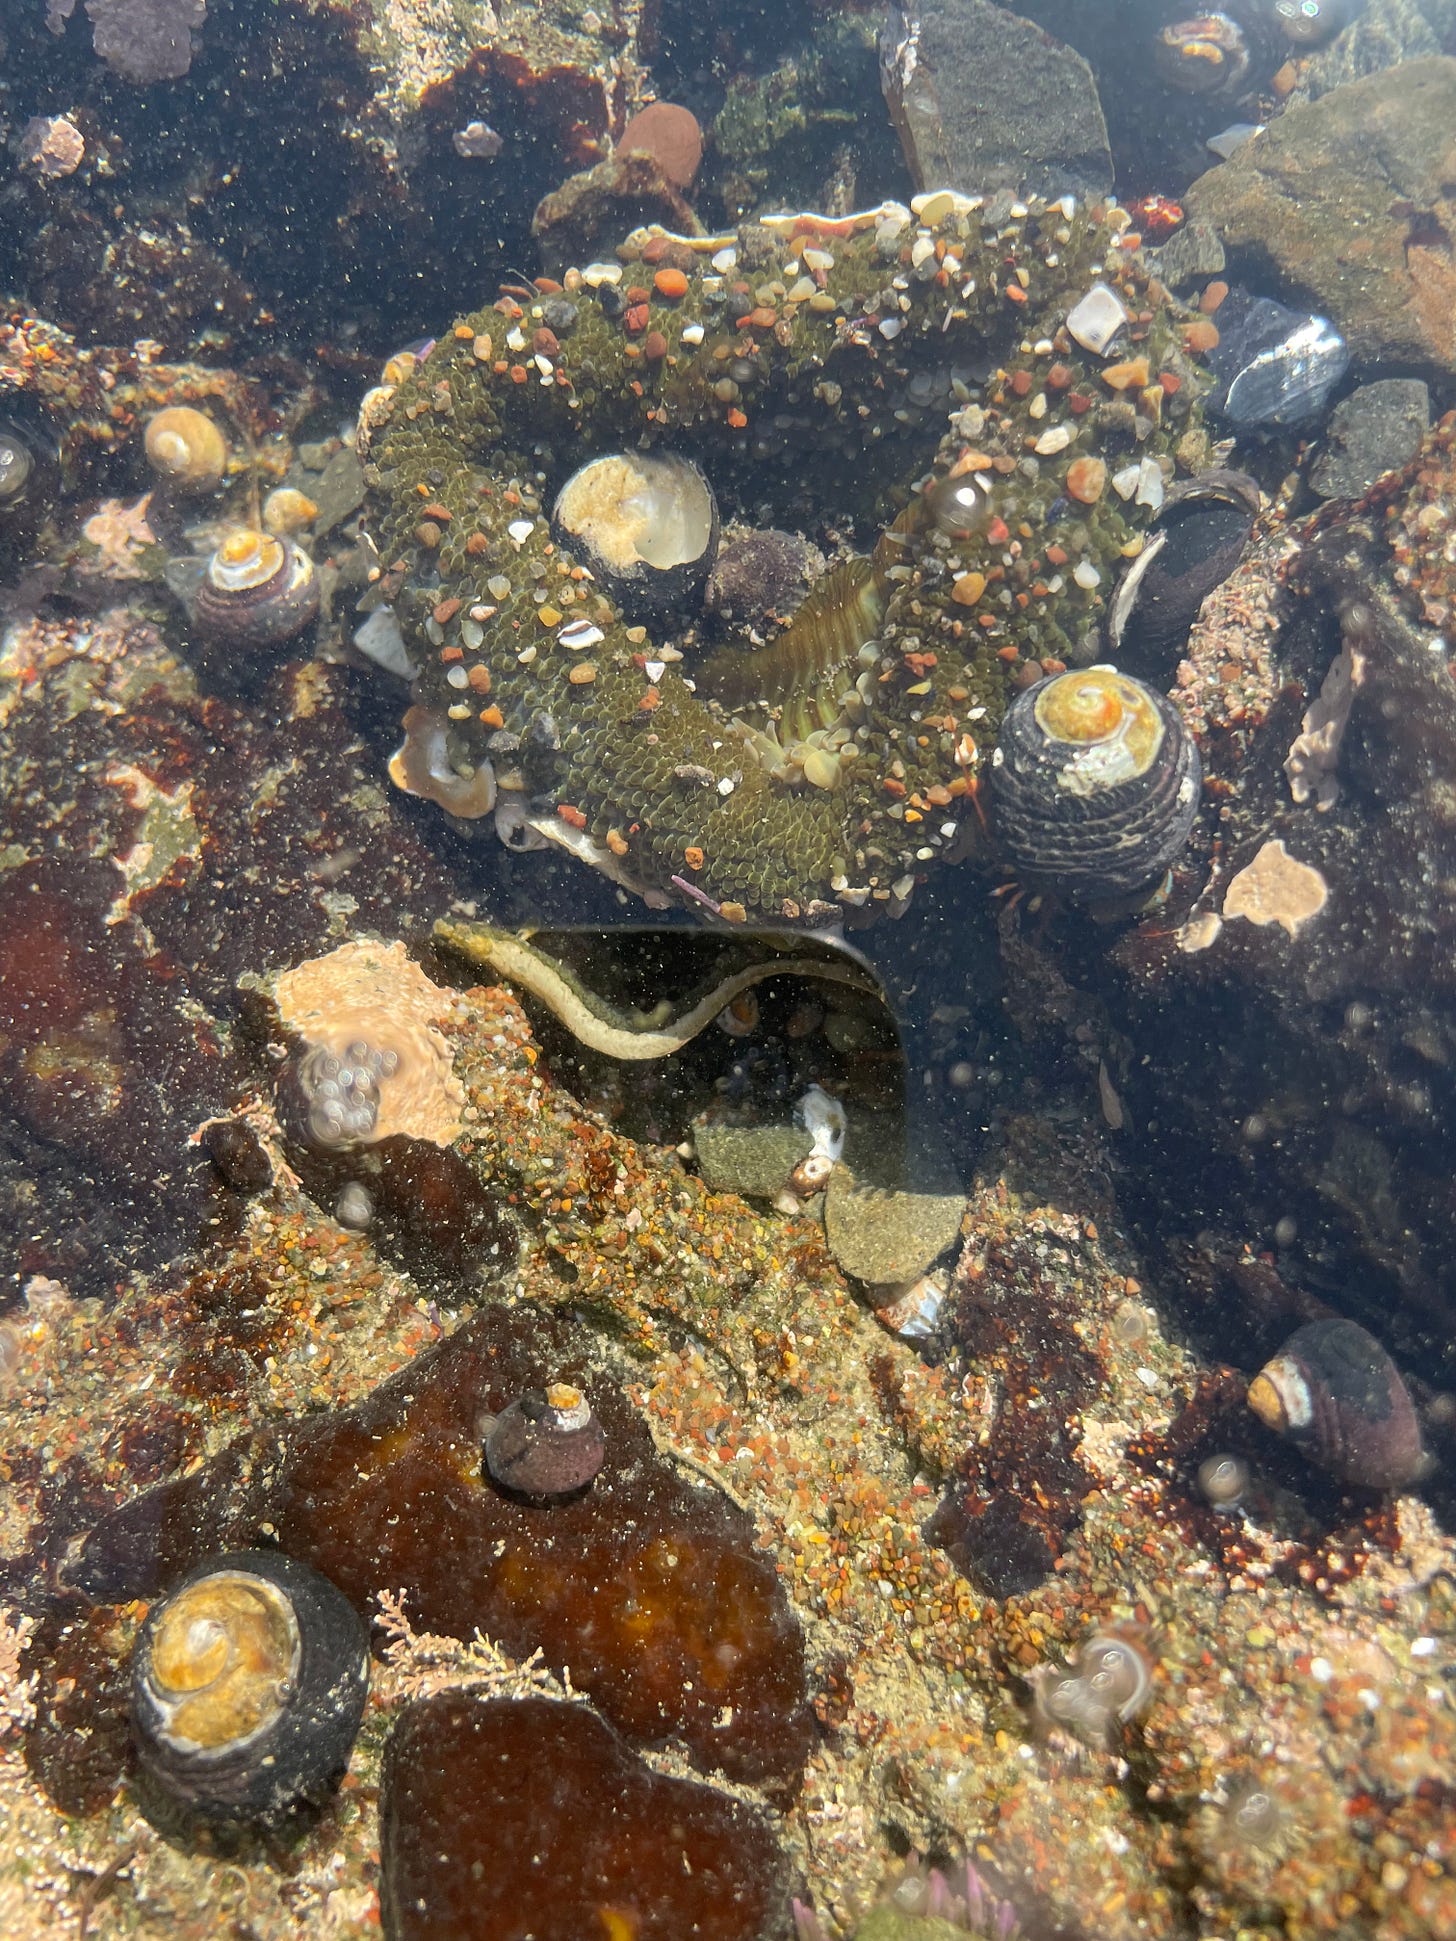 A photo of a tide pool with different sea creatures, shells, and a small eel like fish.